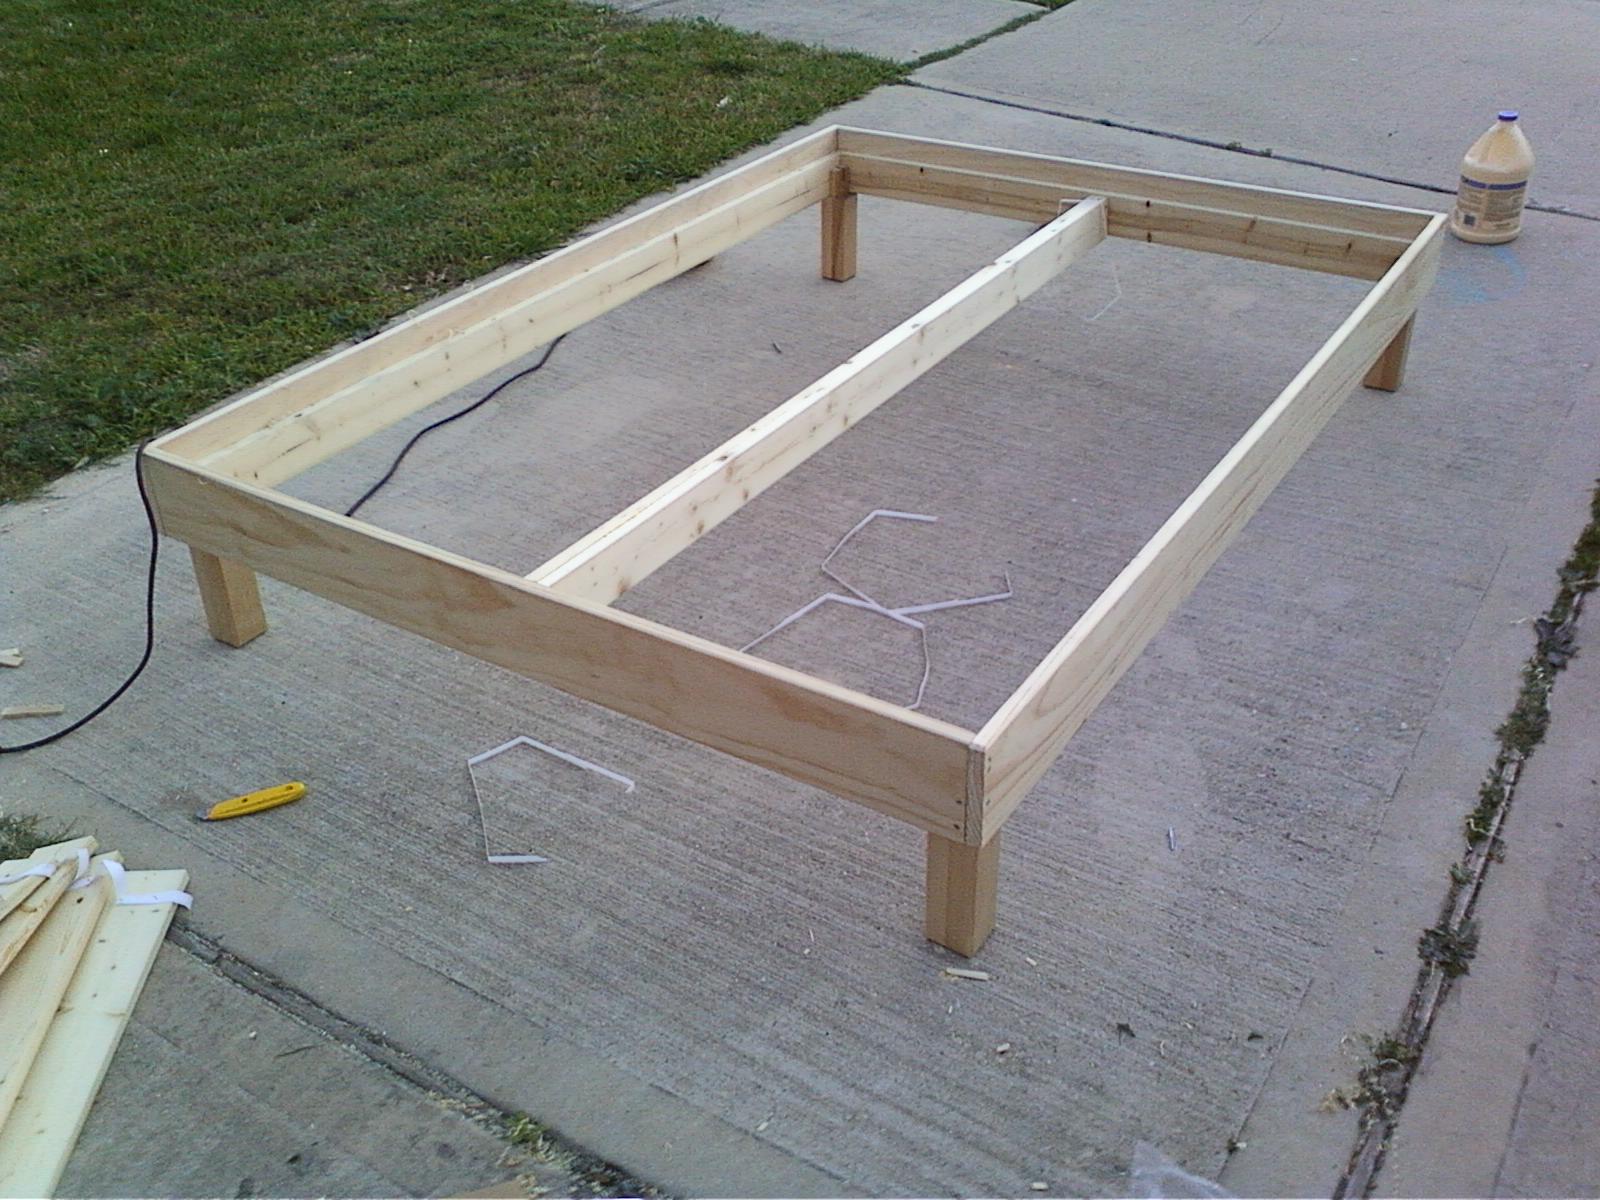 This Week in the Shop: A Bed Frame | woodshopcowboy